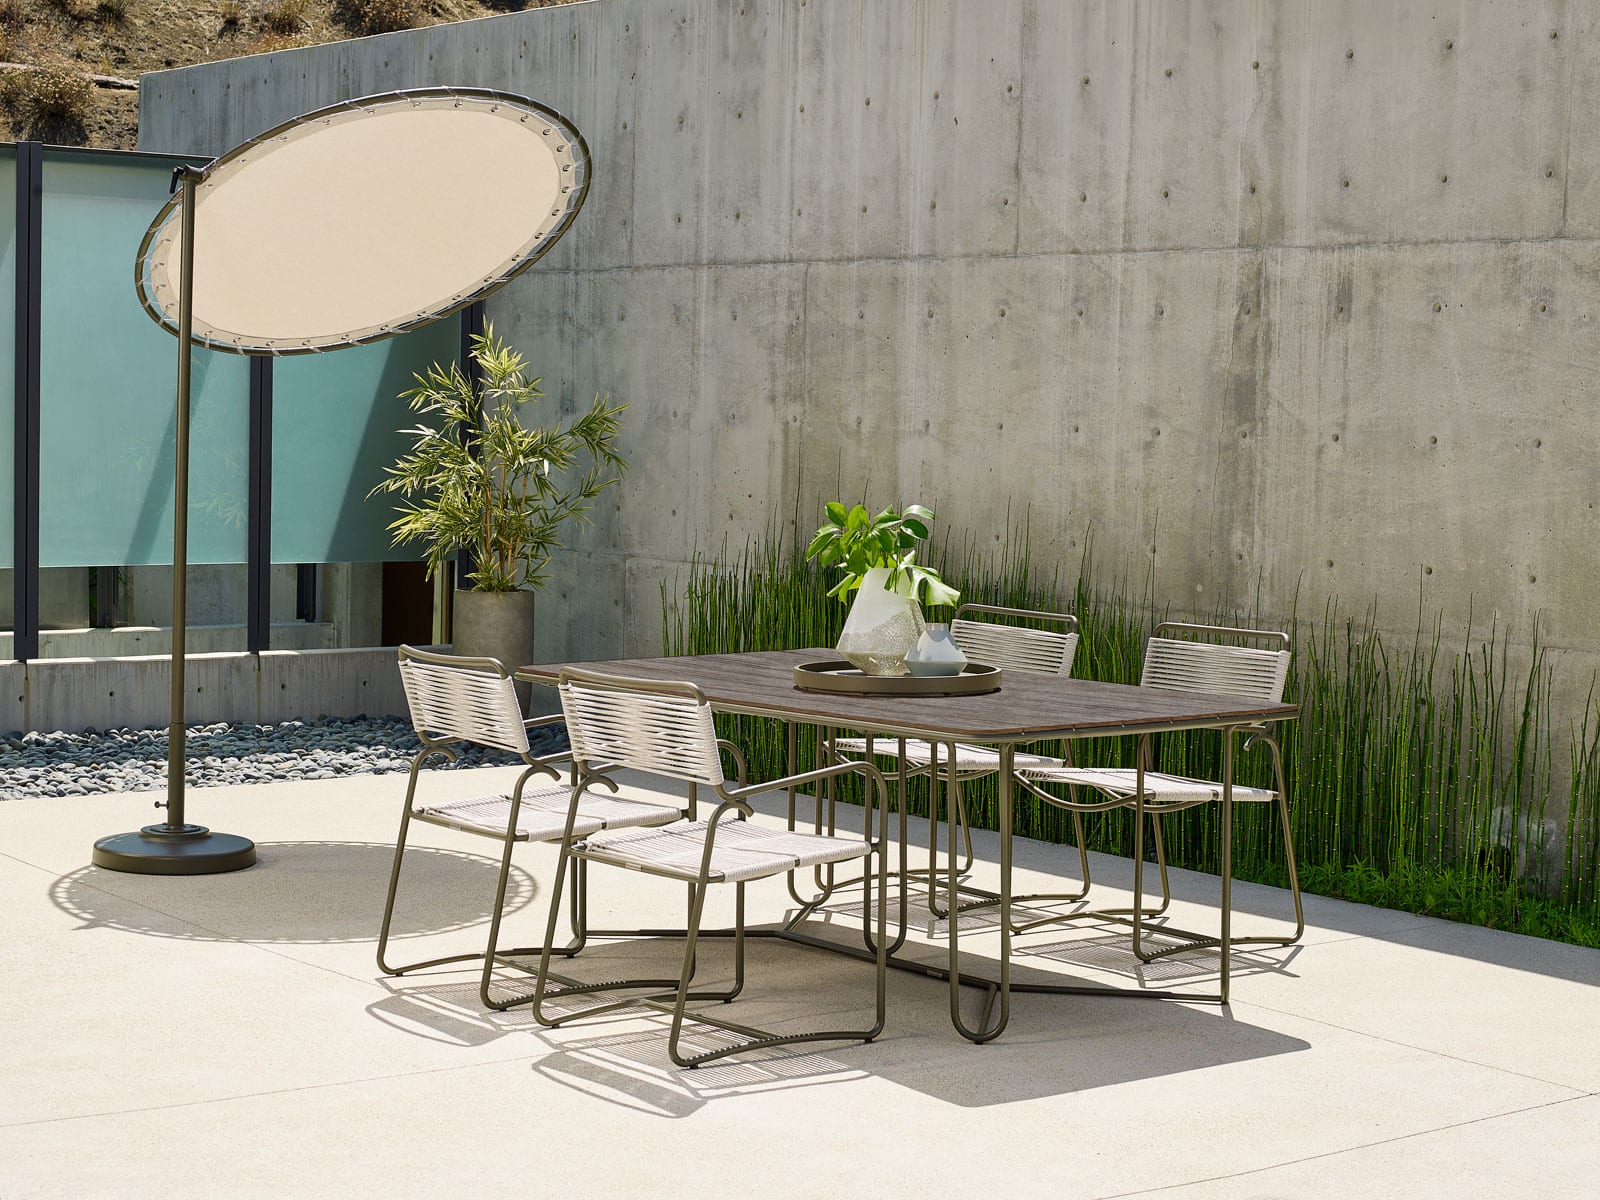 Walter Lamb aluminum dining table from Brown Jordan outdoor furniture on patio in front of a tall wall with a green floral centerpiece